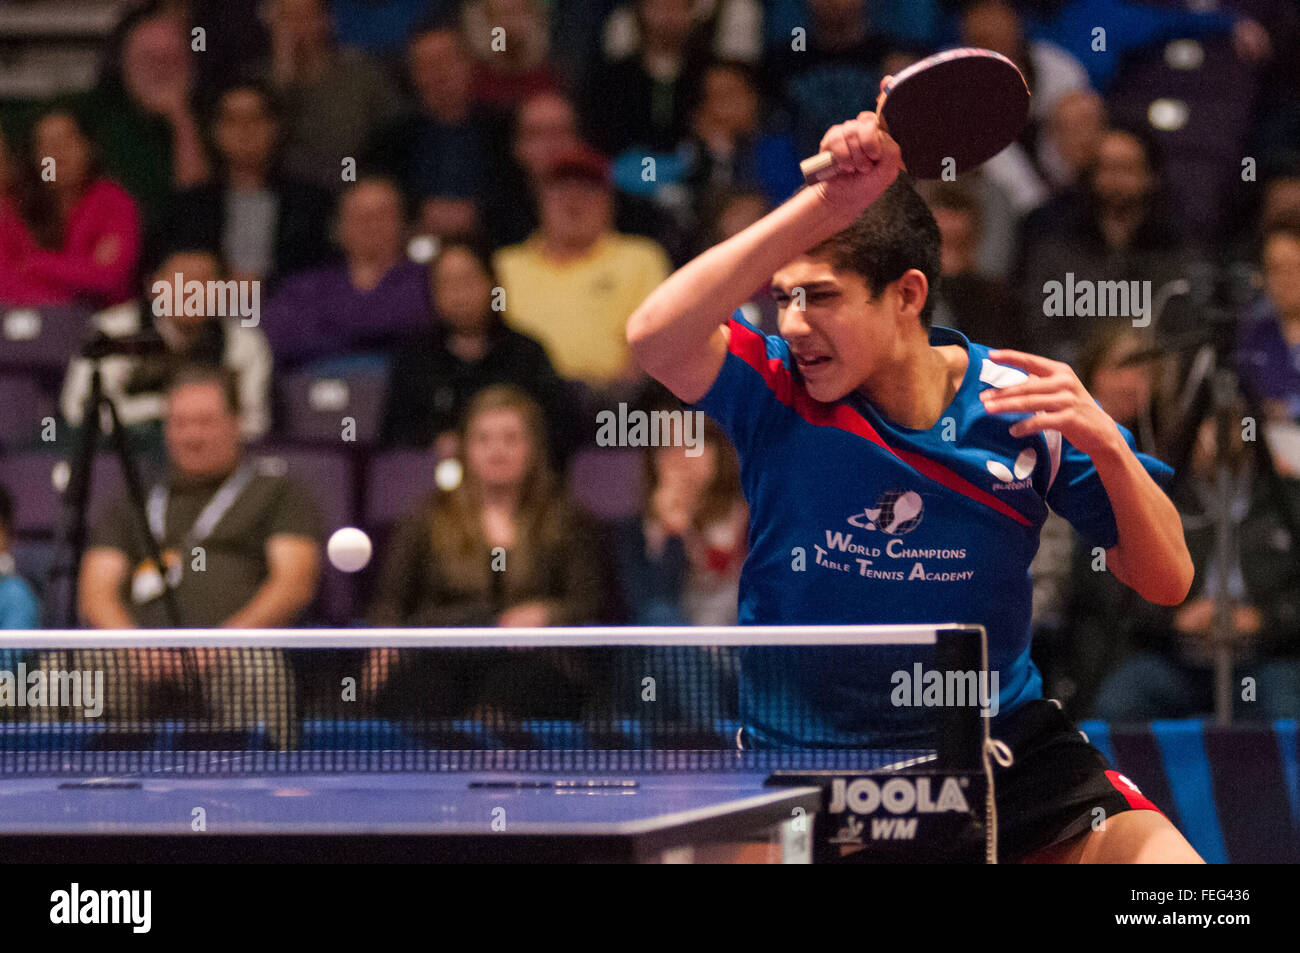 Greensboro, North Carolina, US. 6th Feb, 2016. Feb. 6, 2016 - Greensboro, N.C., USA - KANAK JHA returns a volley from Kunal Chodri during the men's semi-finals on day three of the 2016 U.S. Olympic Table Tennis Trials. Jha defeated Chodri to advance to the men's final. The top three men and women from the trials move on to compete in April at the 2016 North America Olympic Qualification tournament in Ontario, Canada. The 2016 Summer Olympics will be held in Rio De Janeiro, Brazil, Aug. 5-21. © Timothy L. Hale/ZUMA Wire/Alamy Live News Stock Photo